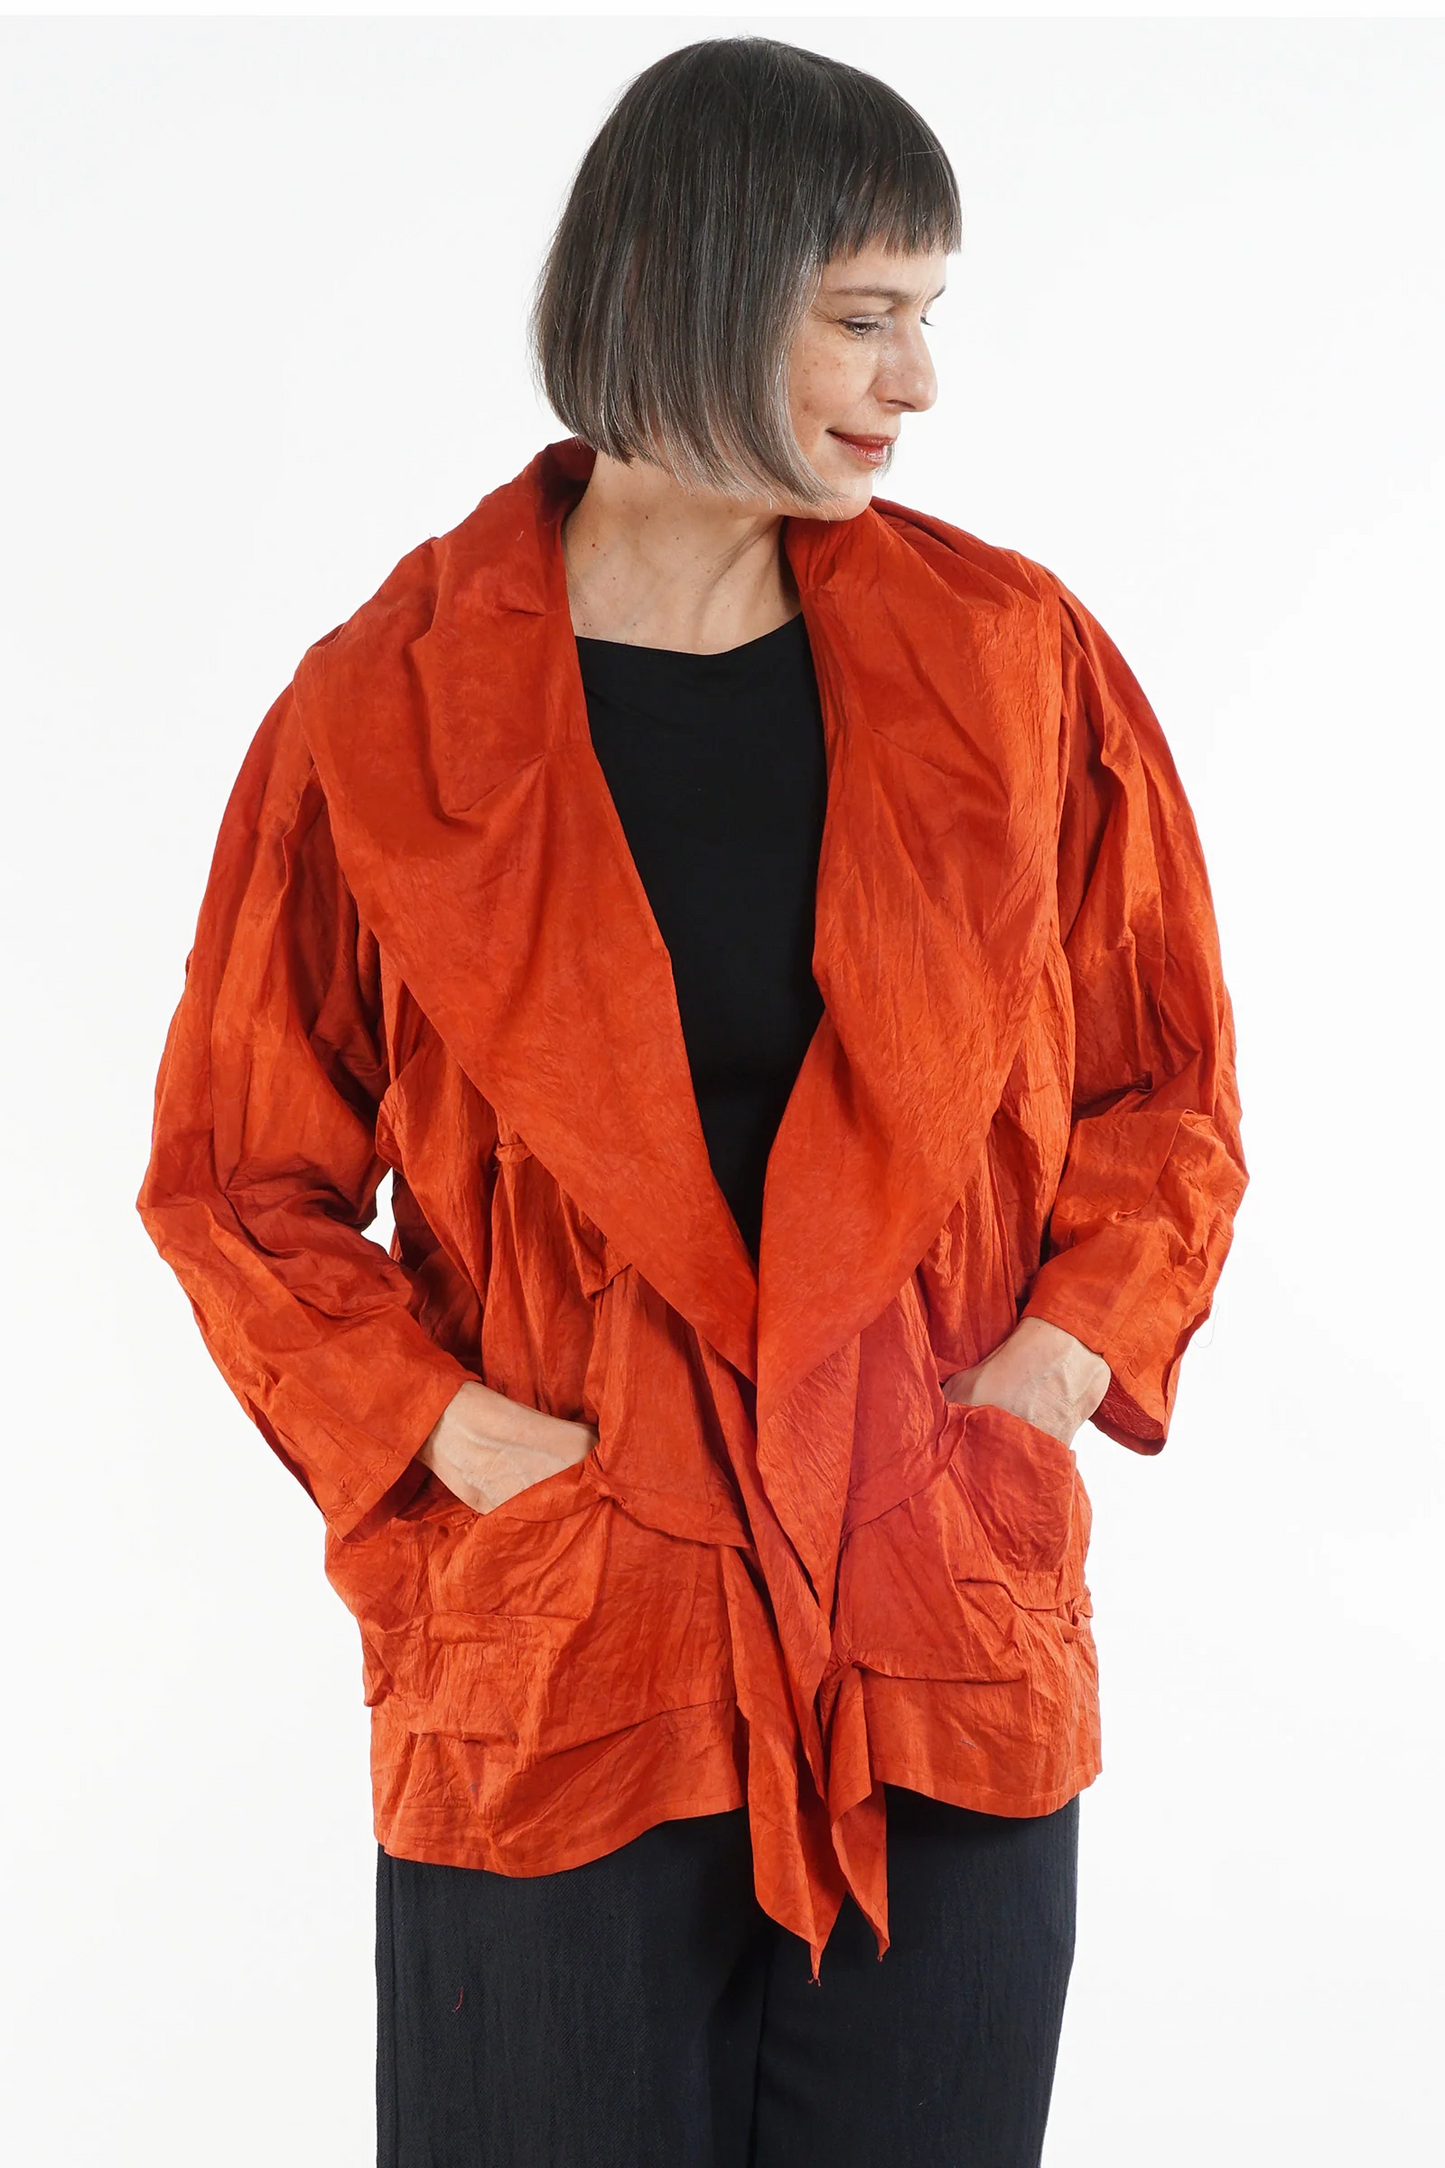 DYED COTTON SILK HEAVY VOILE WAVY TUCK COCOON JACKET - dh1063-org -